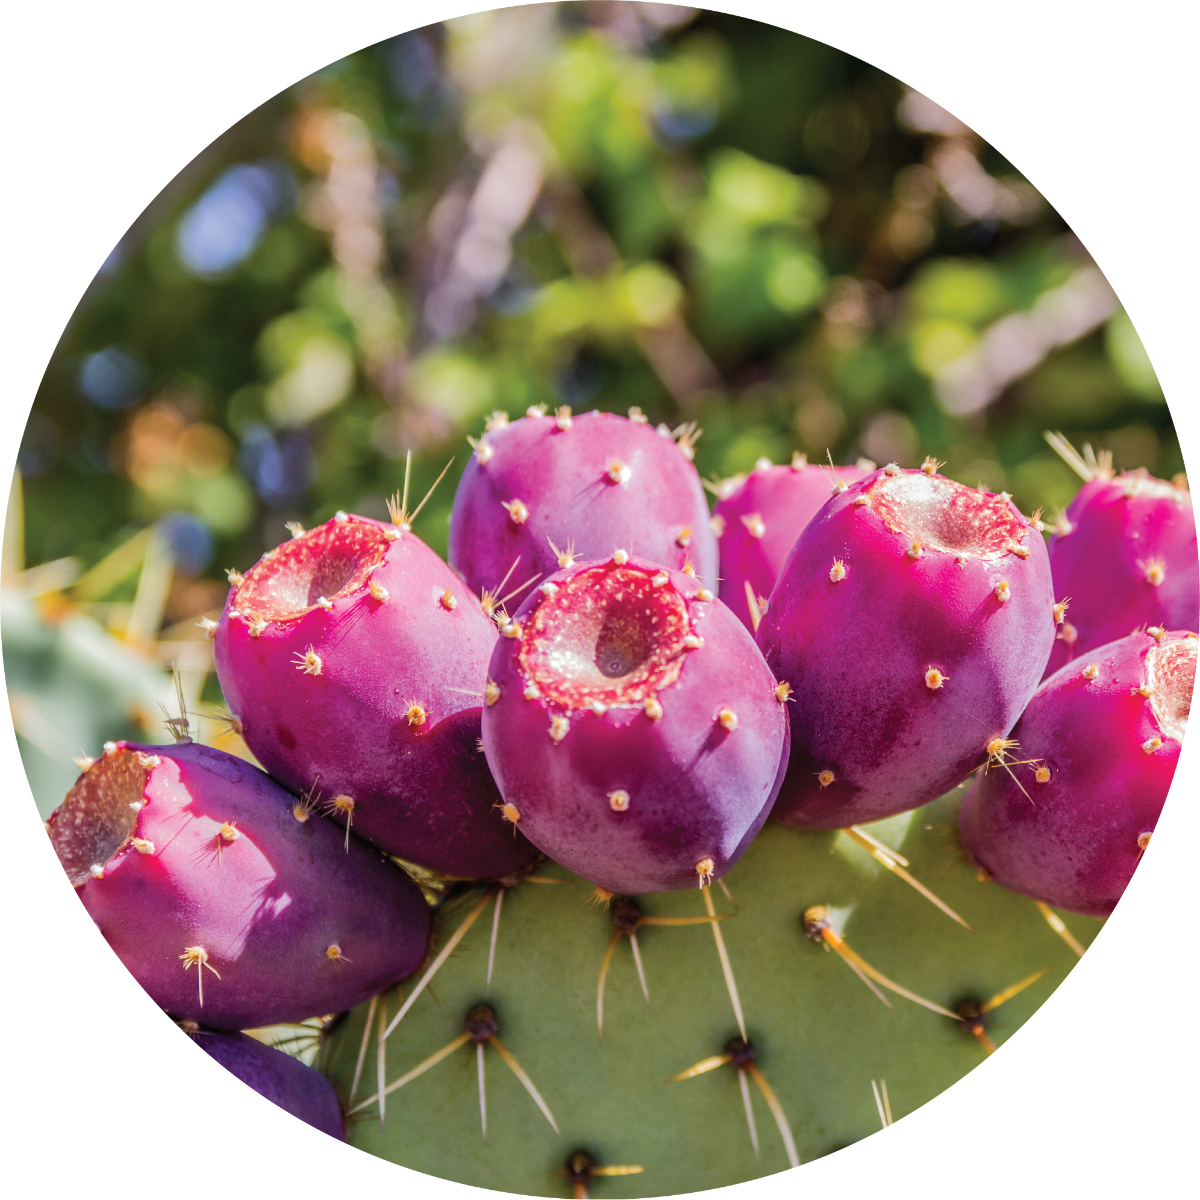 Organic virgin Prickly Pear seed oil & other carrier oils @ bulk price